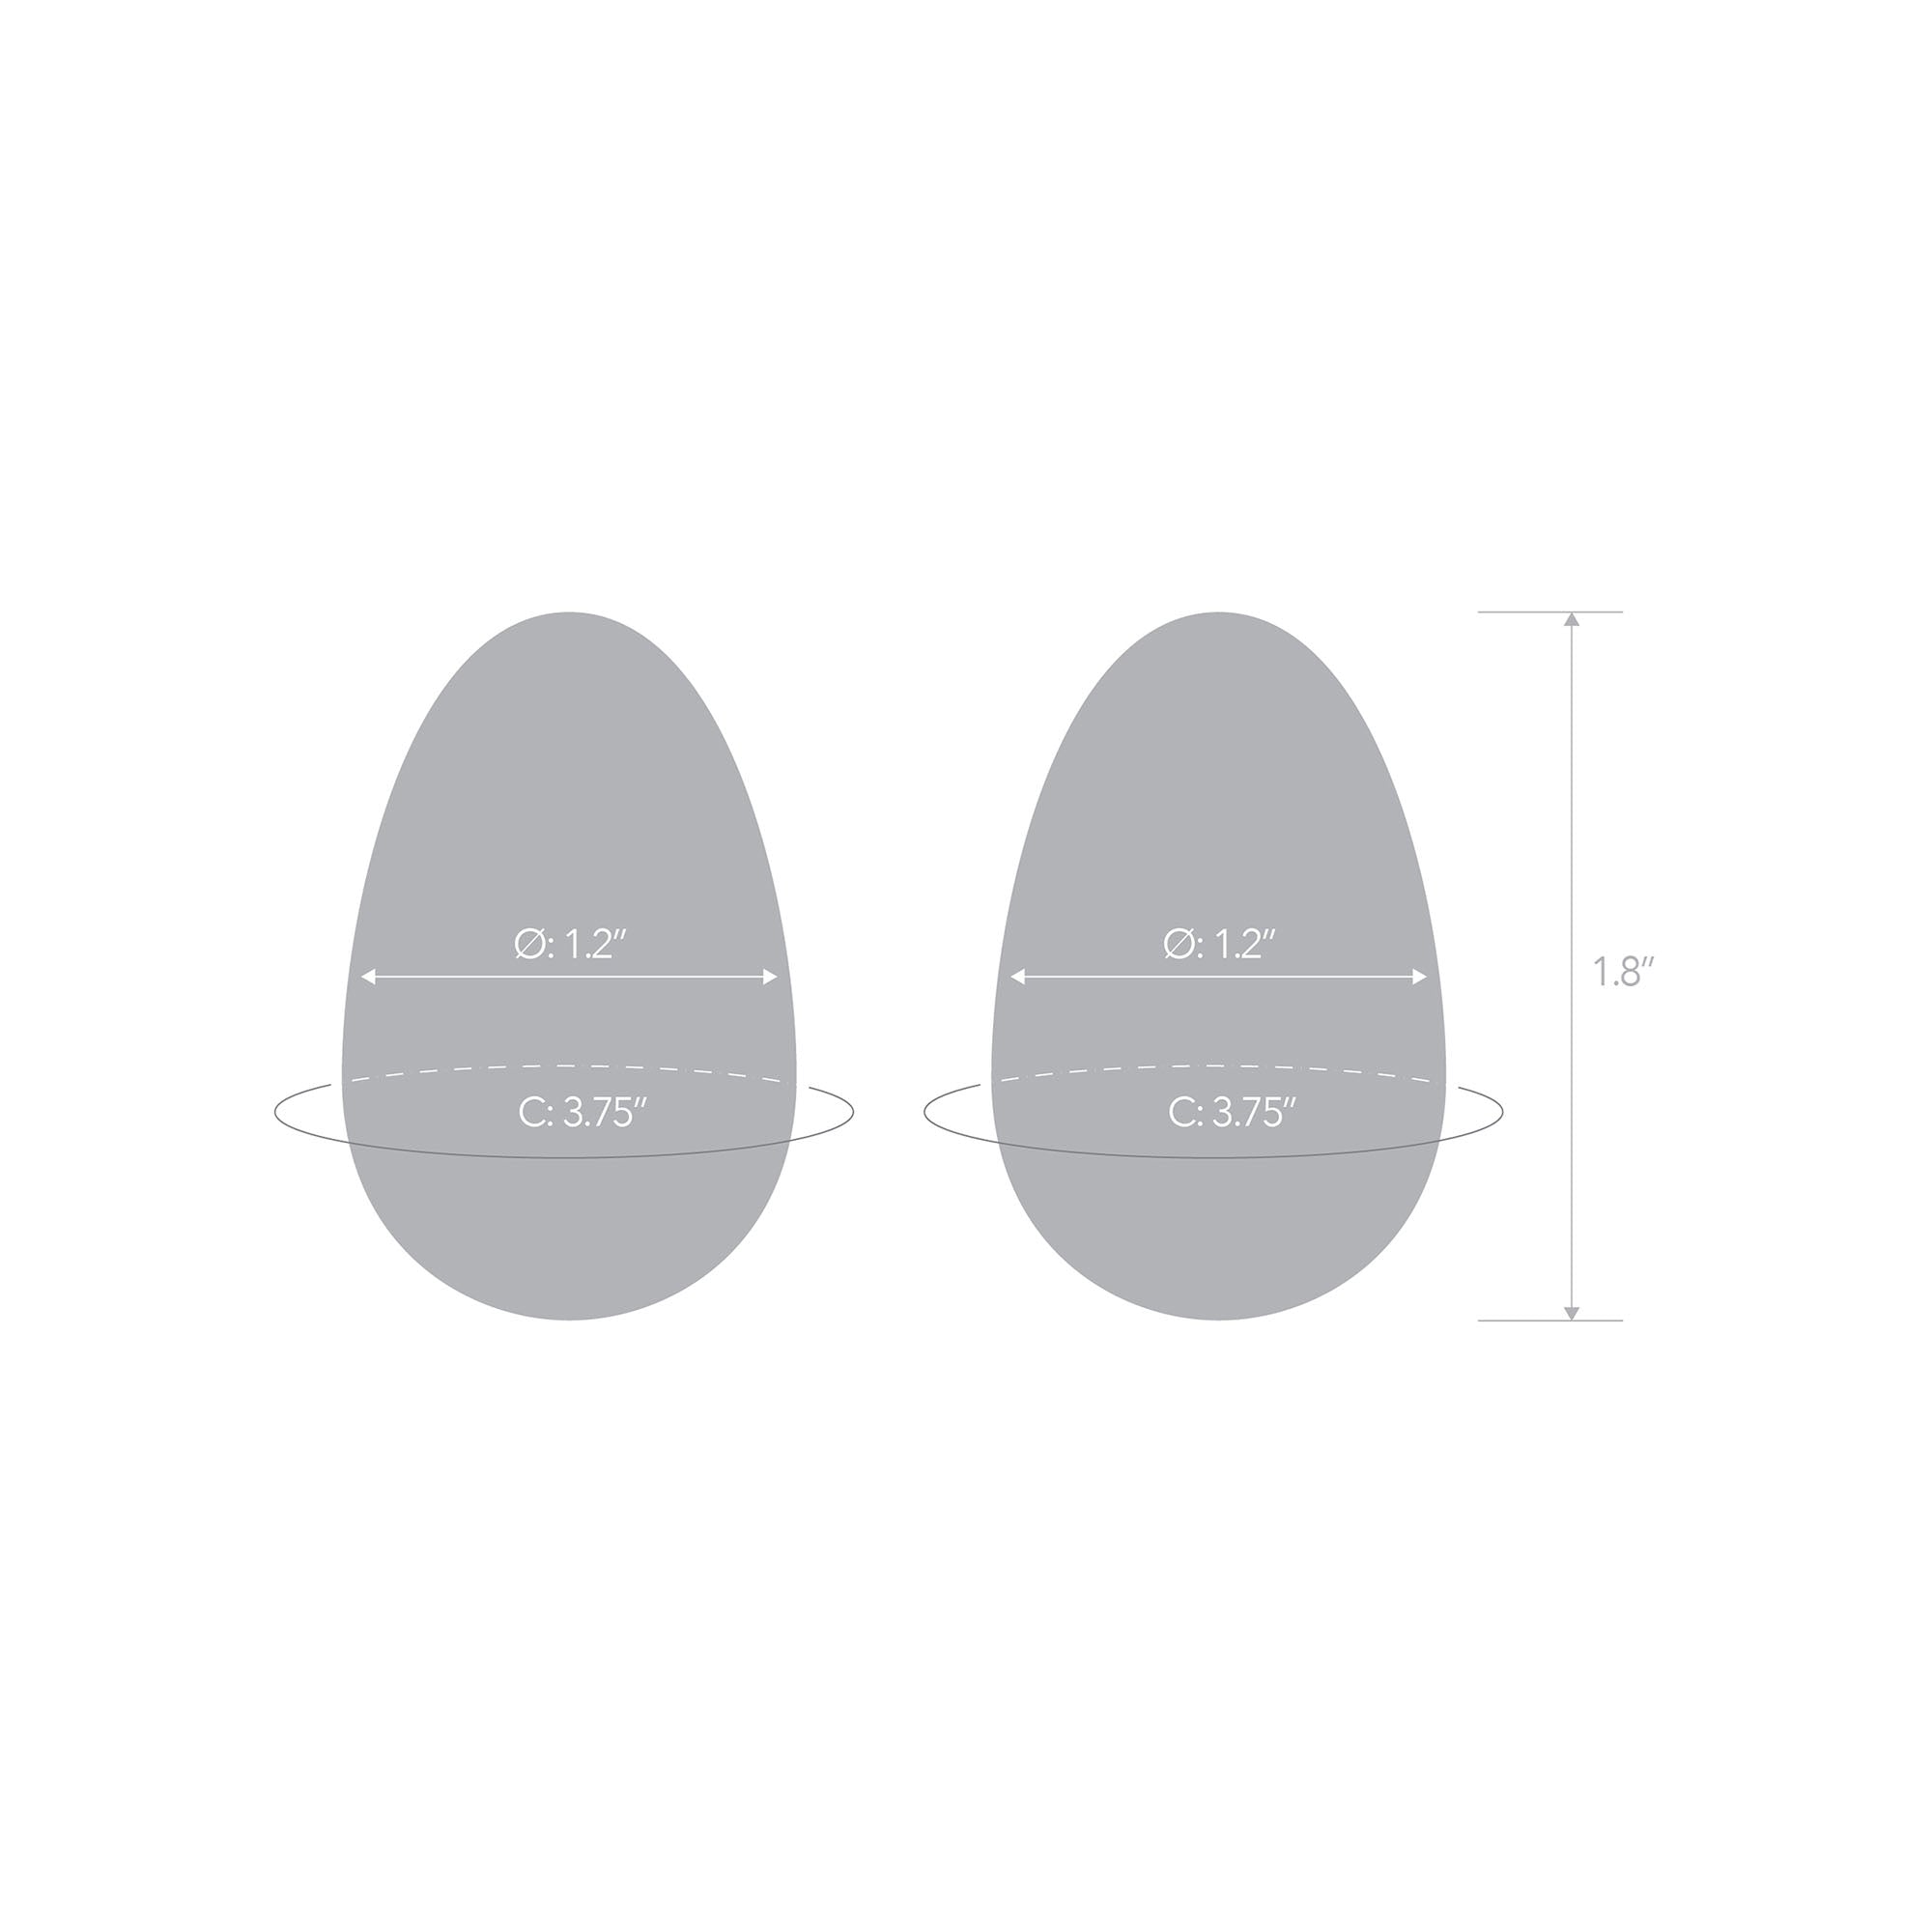 Specifications of the Glass Yoni Eggs Kegel Training Set (2 Pieces)